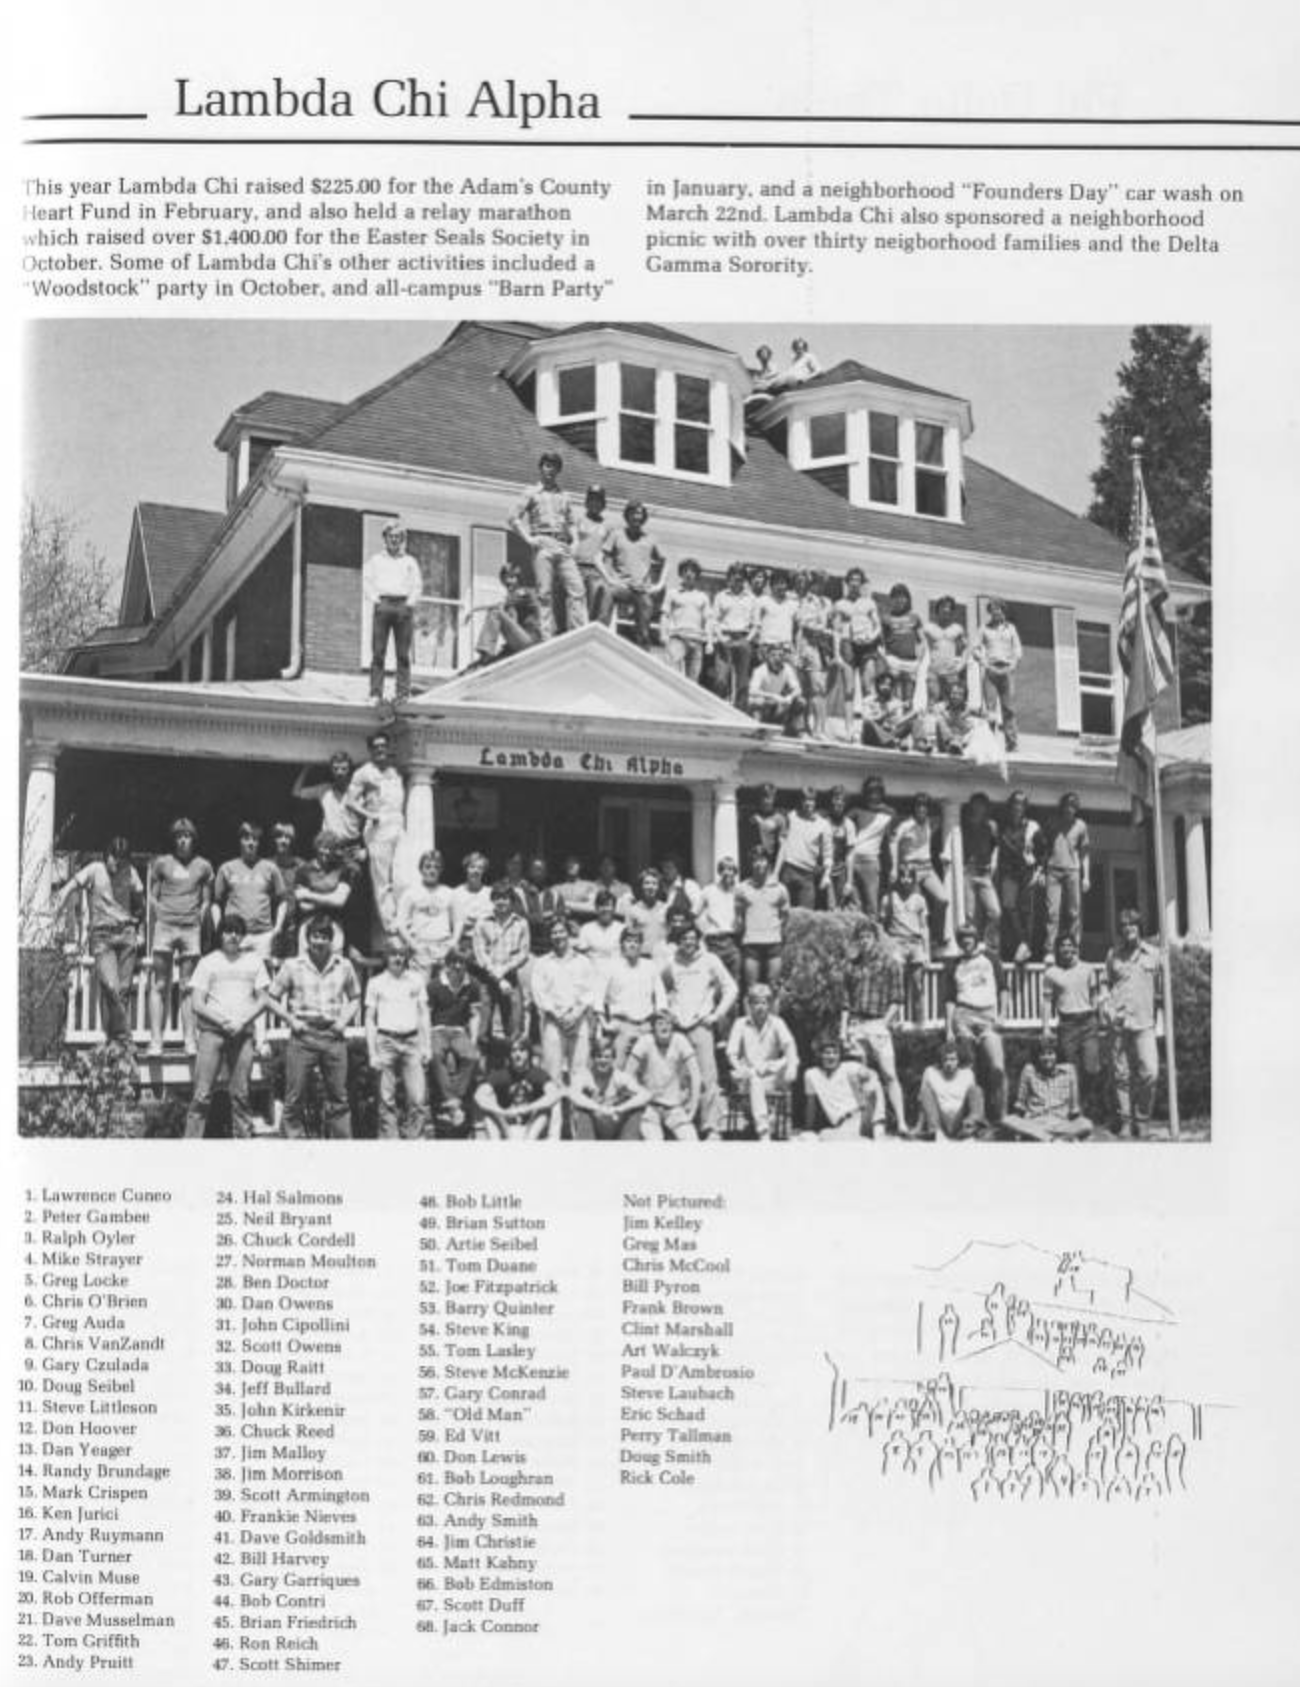 Throwback to Lambda Chi Alpha in 1980